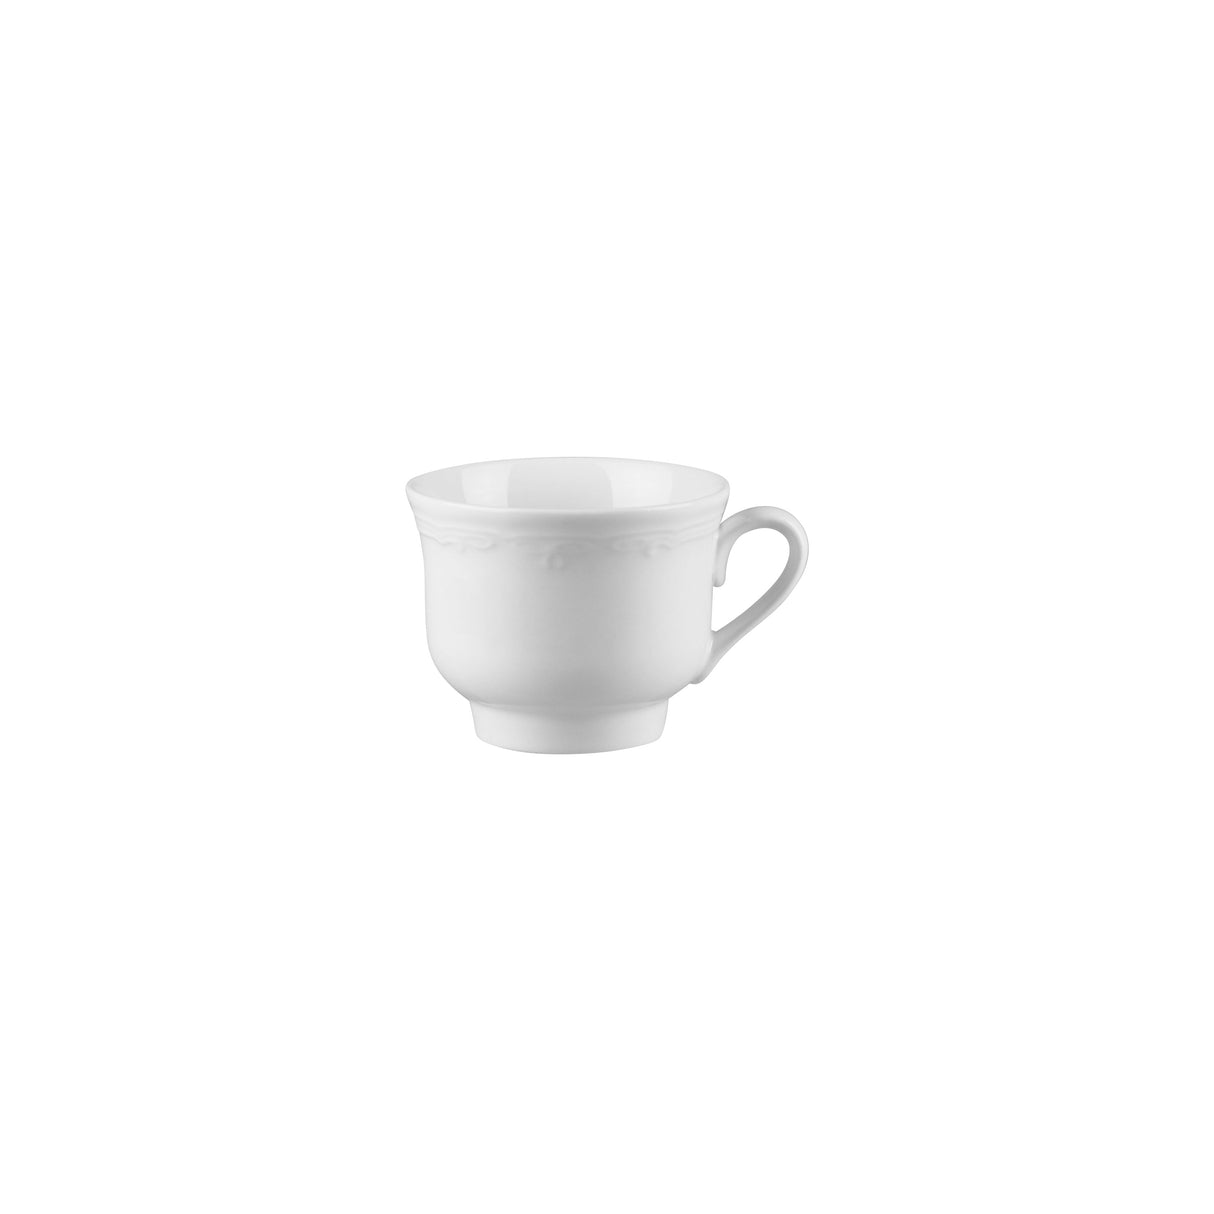 Tea Cup - 220Ml, Renaissance from Australia Fine China. made out of Porcelain and sold in boxes of 72. Hospitality quality at wholesale price with The Flying Fork! 